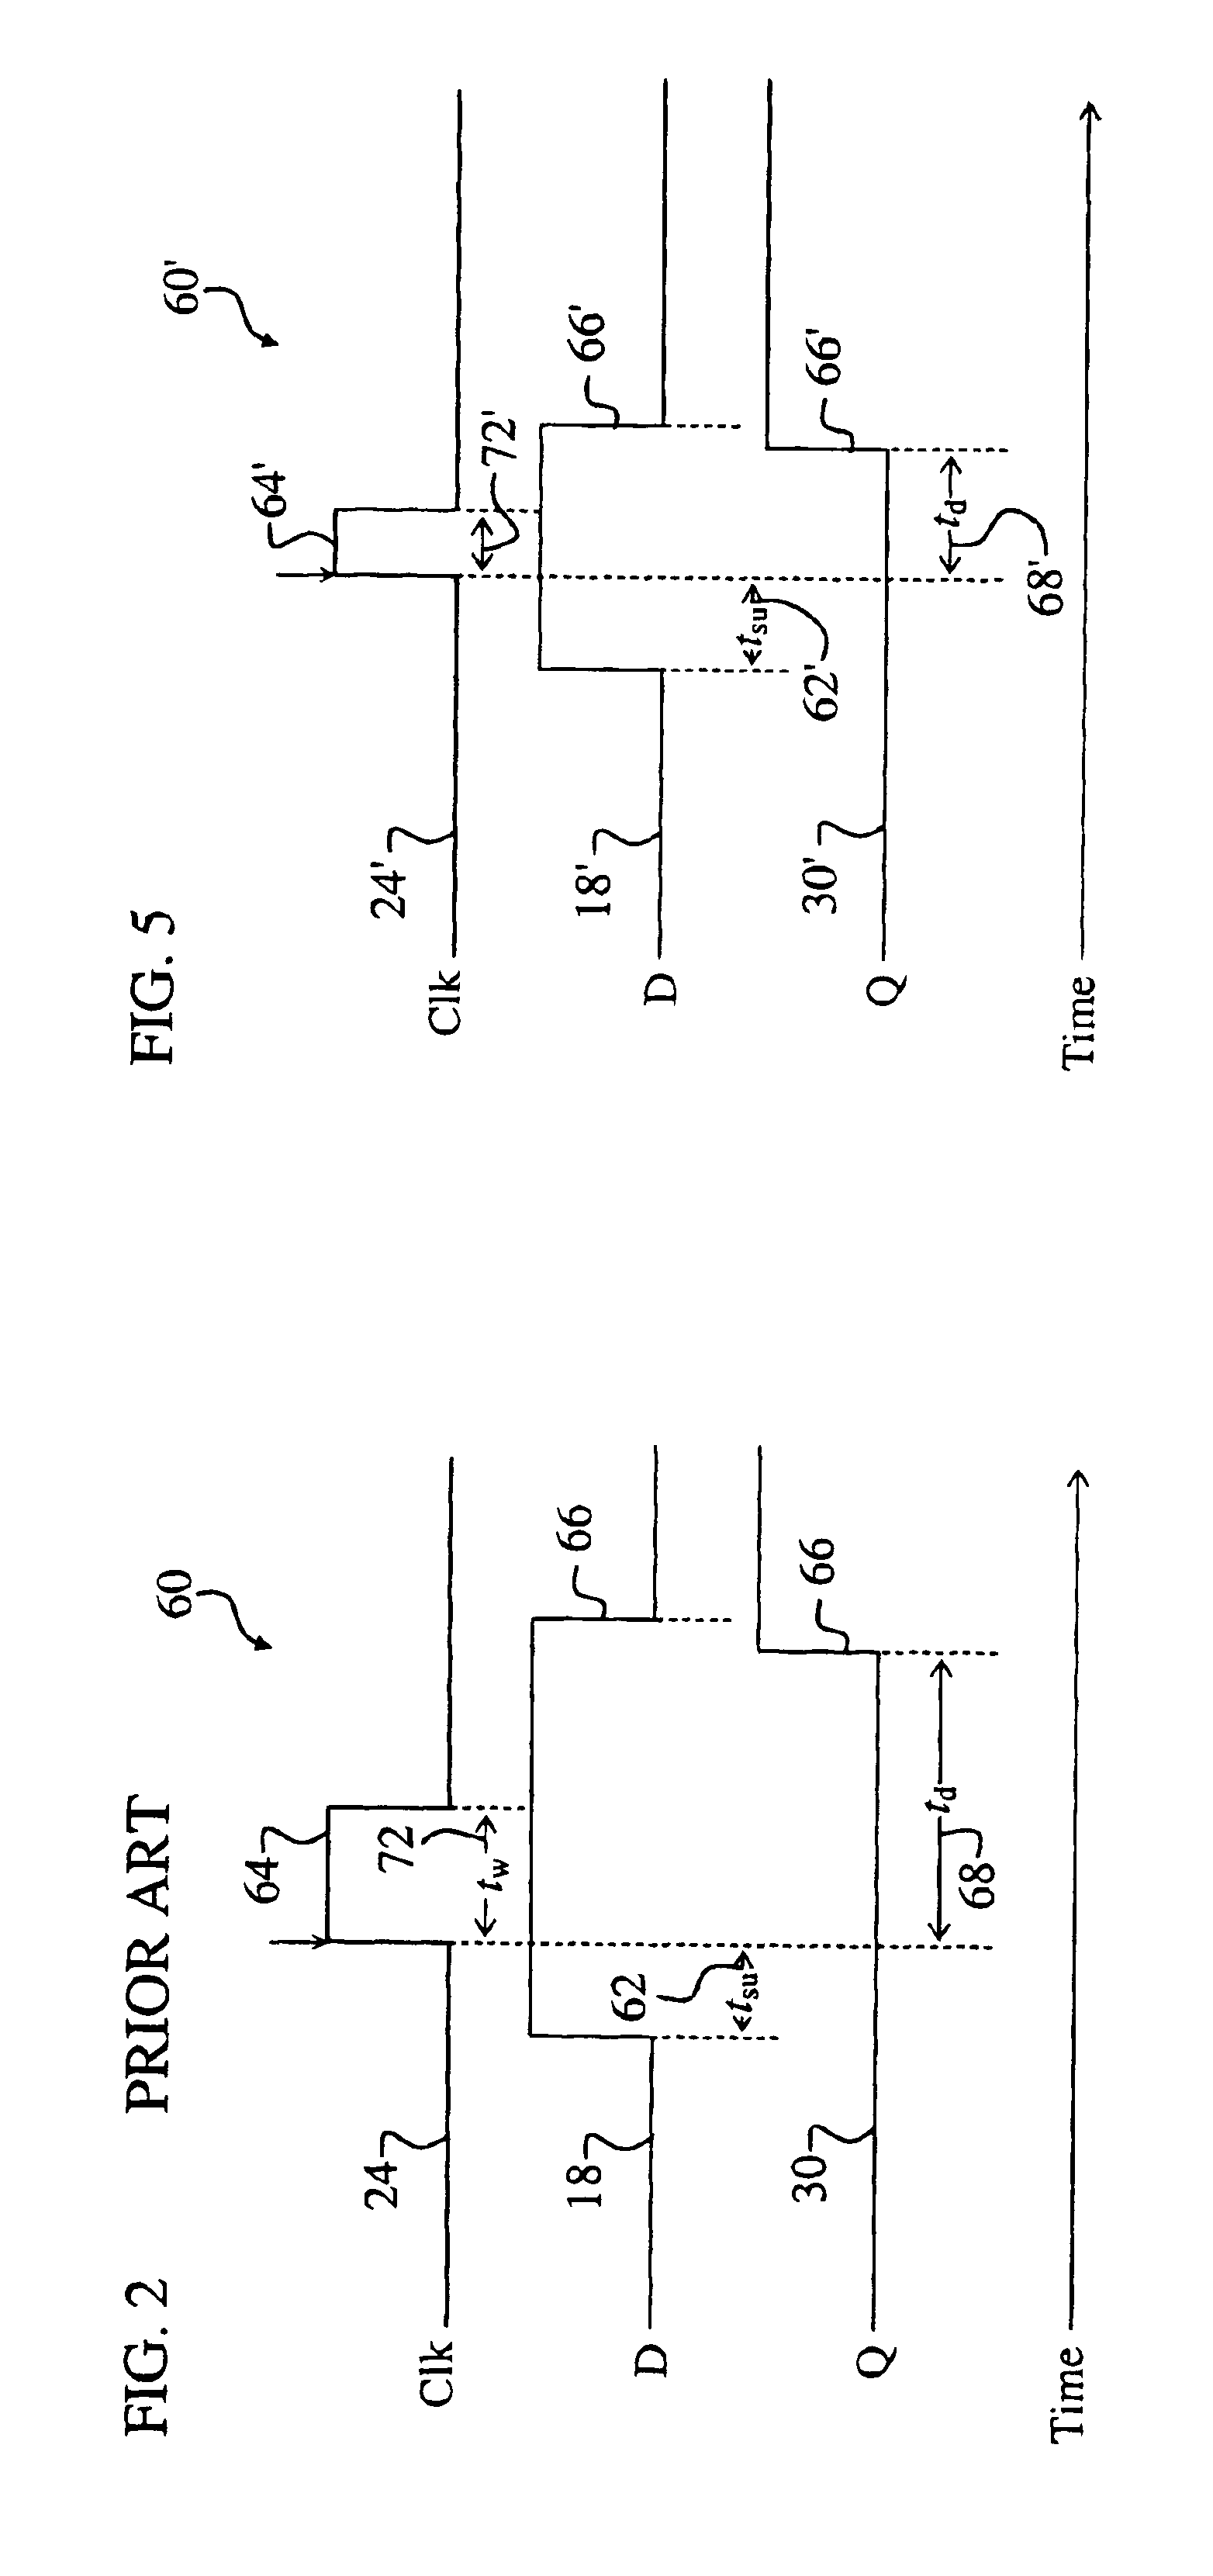 System for reducing leakage in integrated circuits during sleep mode